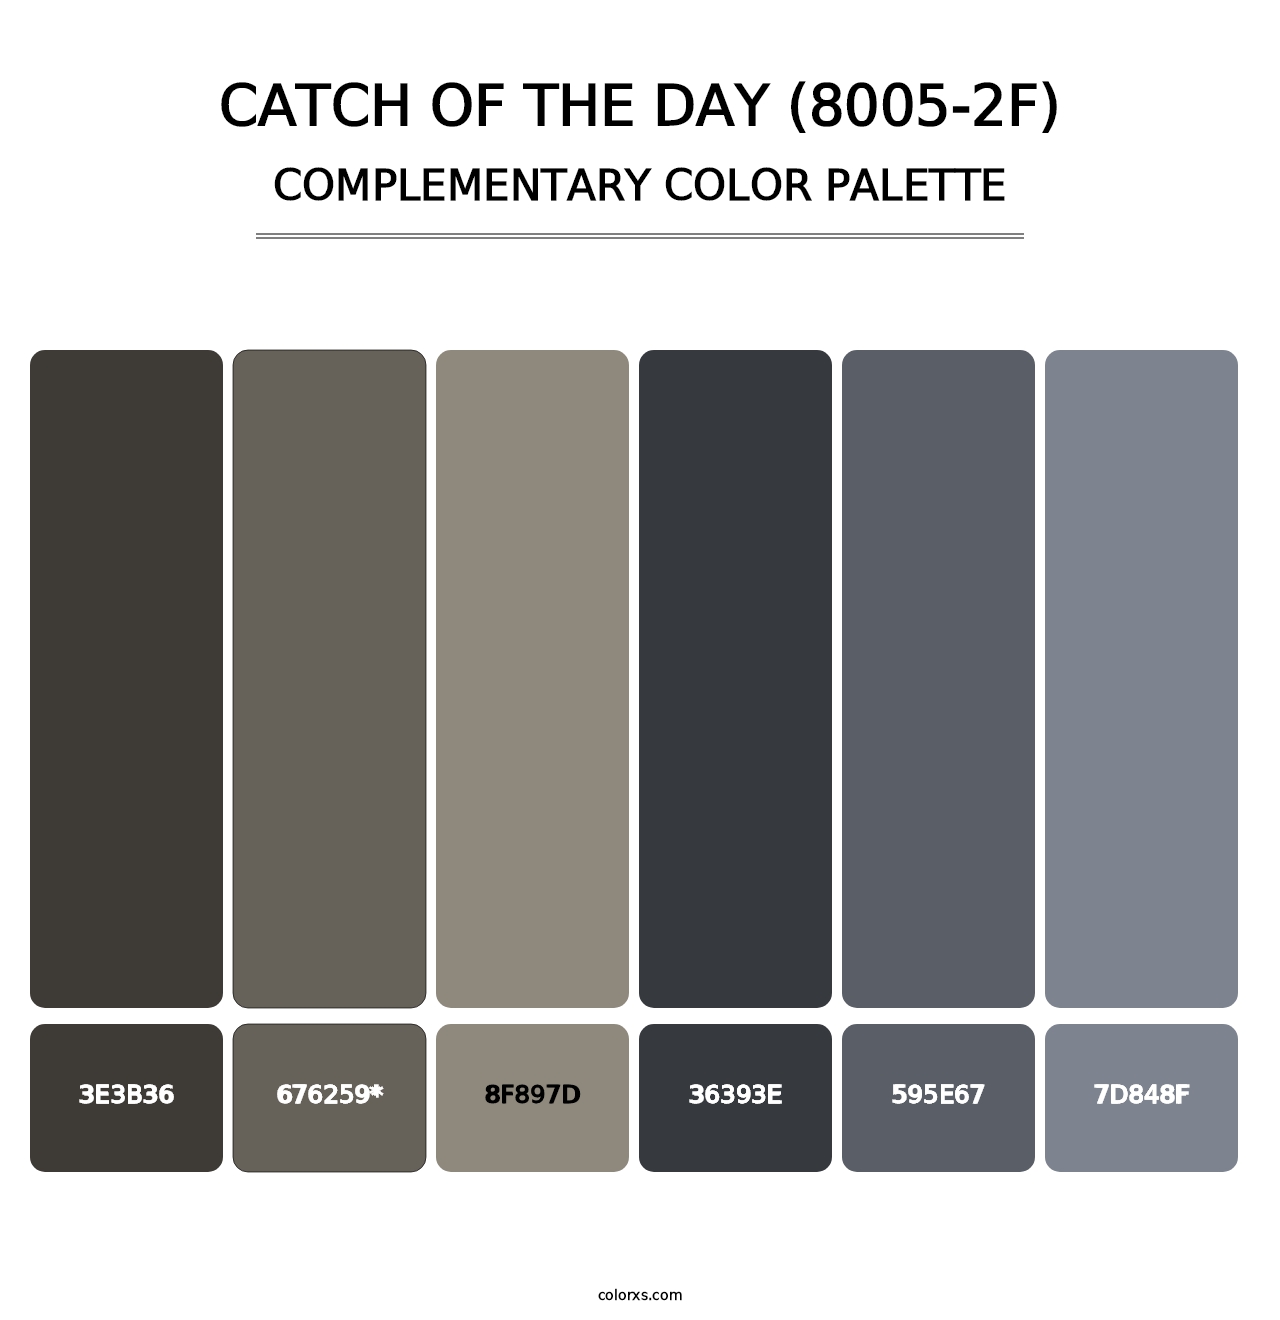 Catch of the Day (8005-2F) - Complementary Color Palette